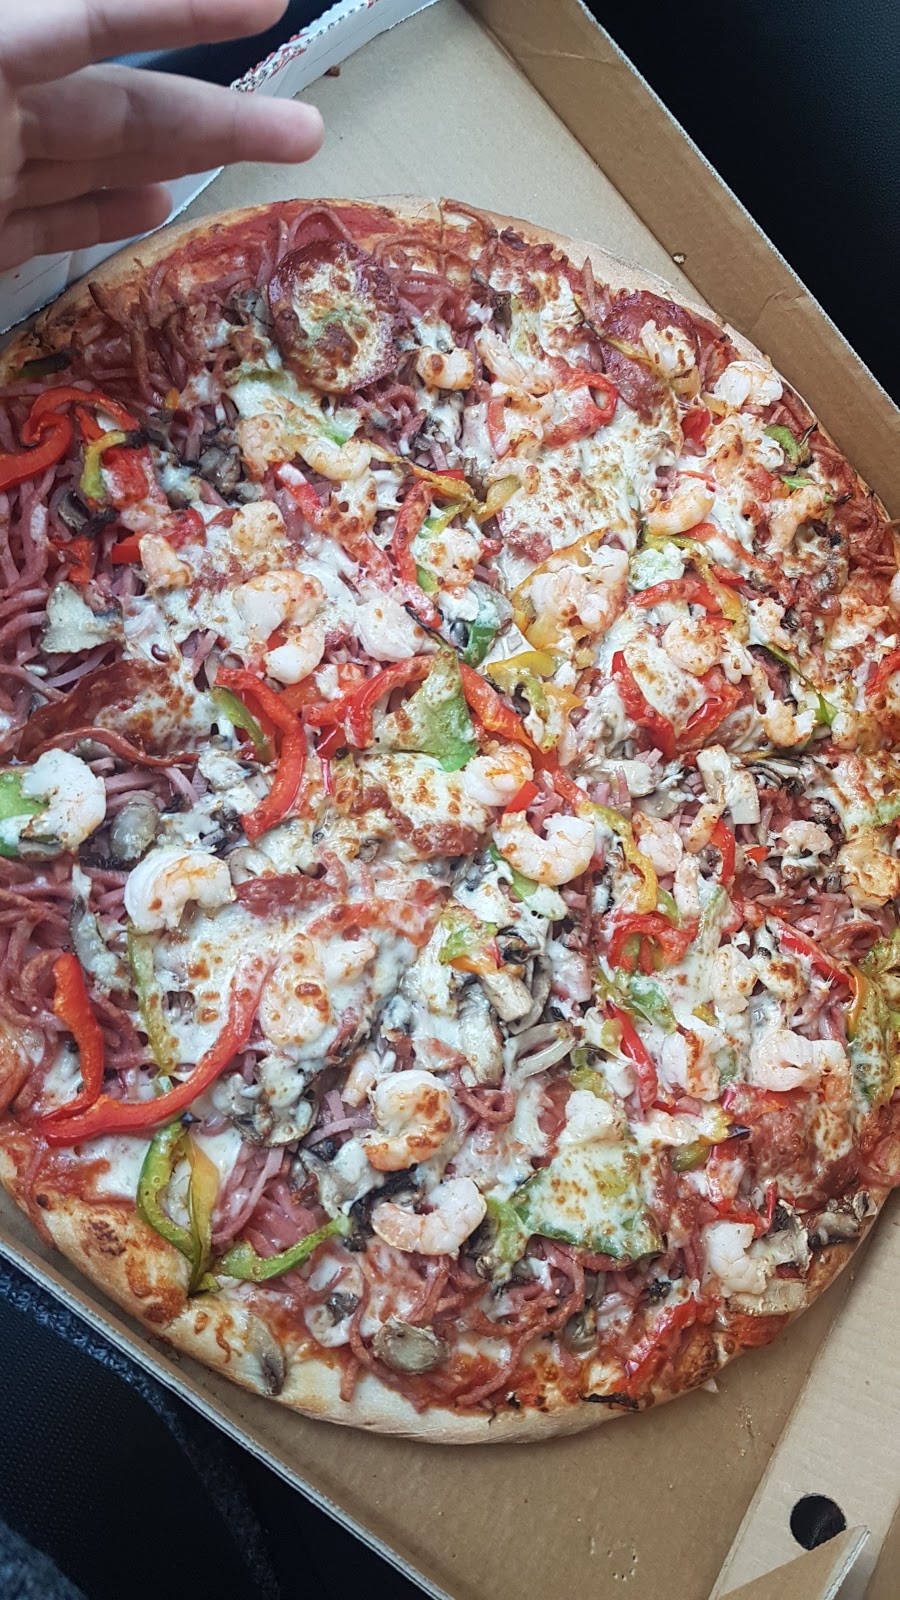 Empire Pizza House | meal delivery | 757A Gilbert Rd, Reservoir VIC 3073, Australia | 0394704636 OR +61 3 9470 4636